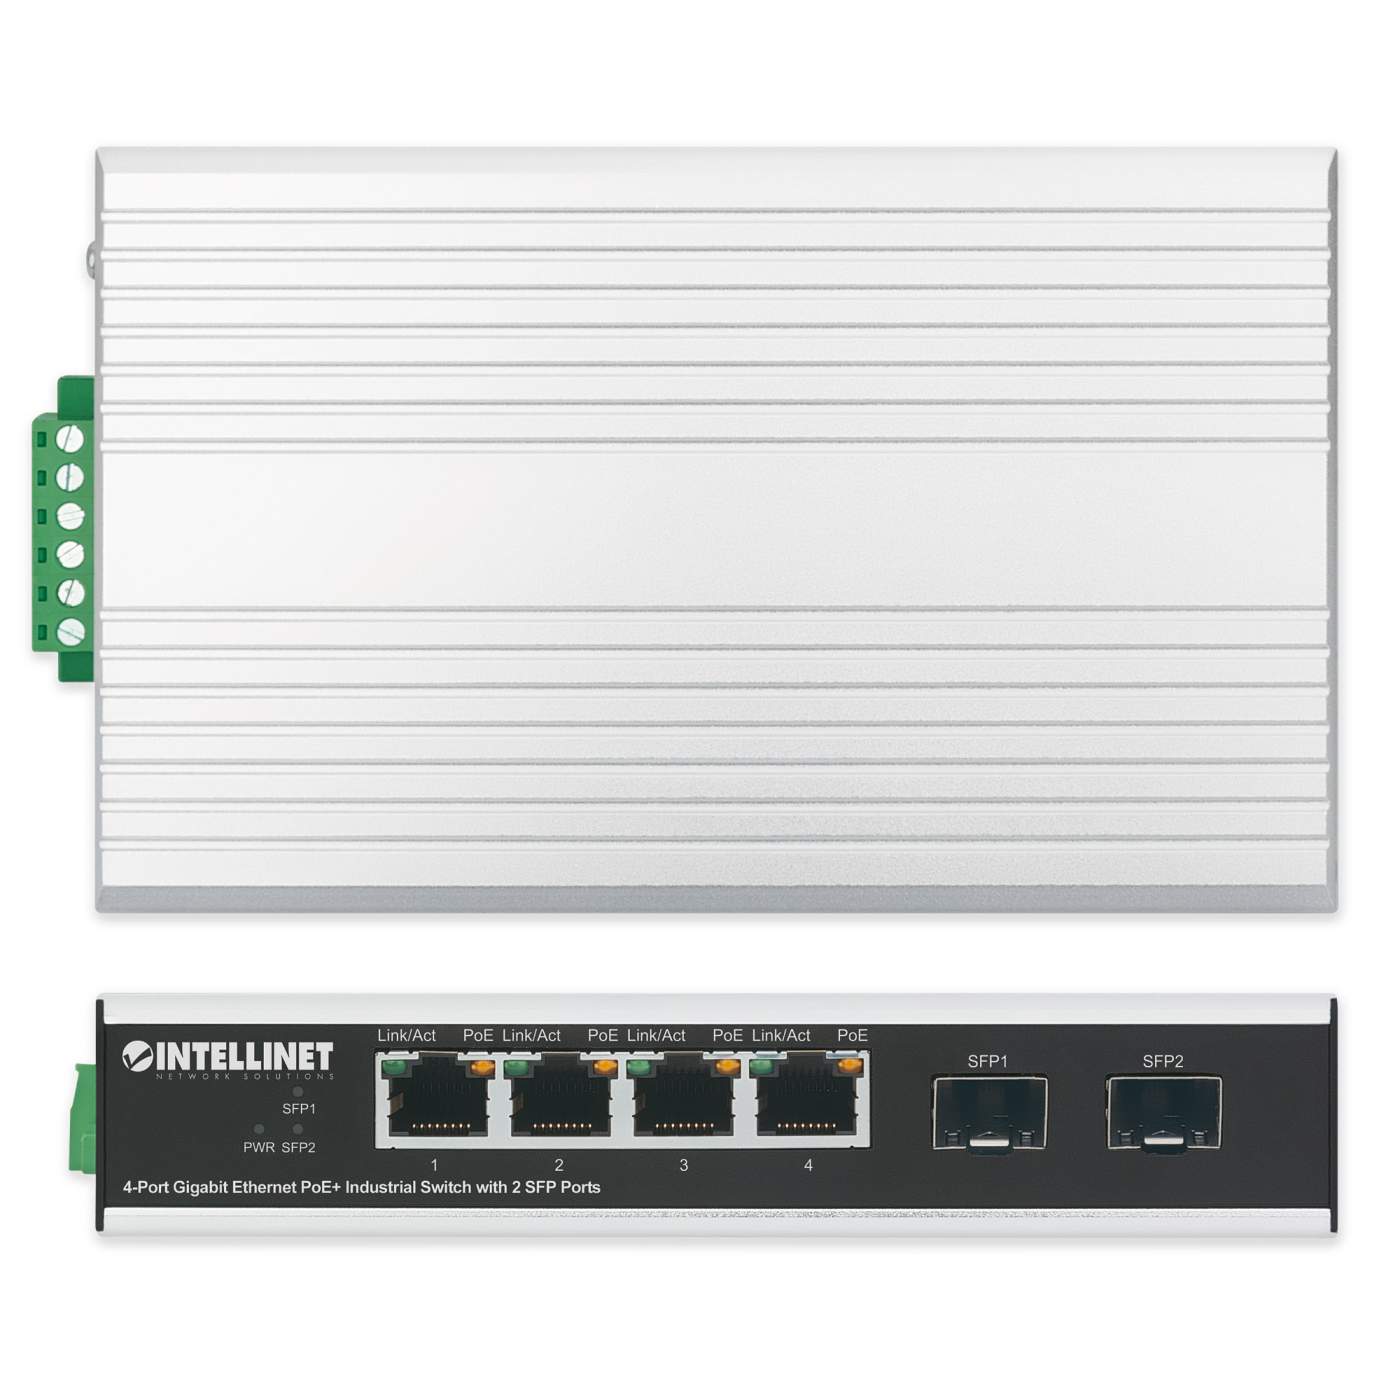 Industrial 4-Port Gigabit Ethernet PoE+ Switch with 2 SFP Ports Image 6